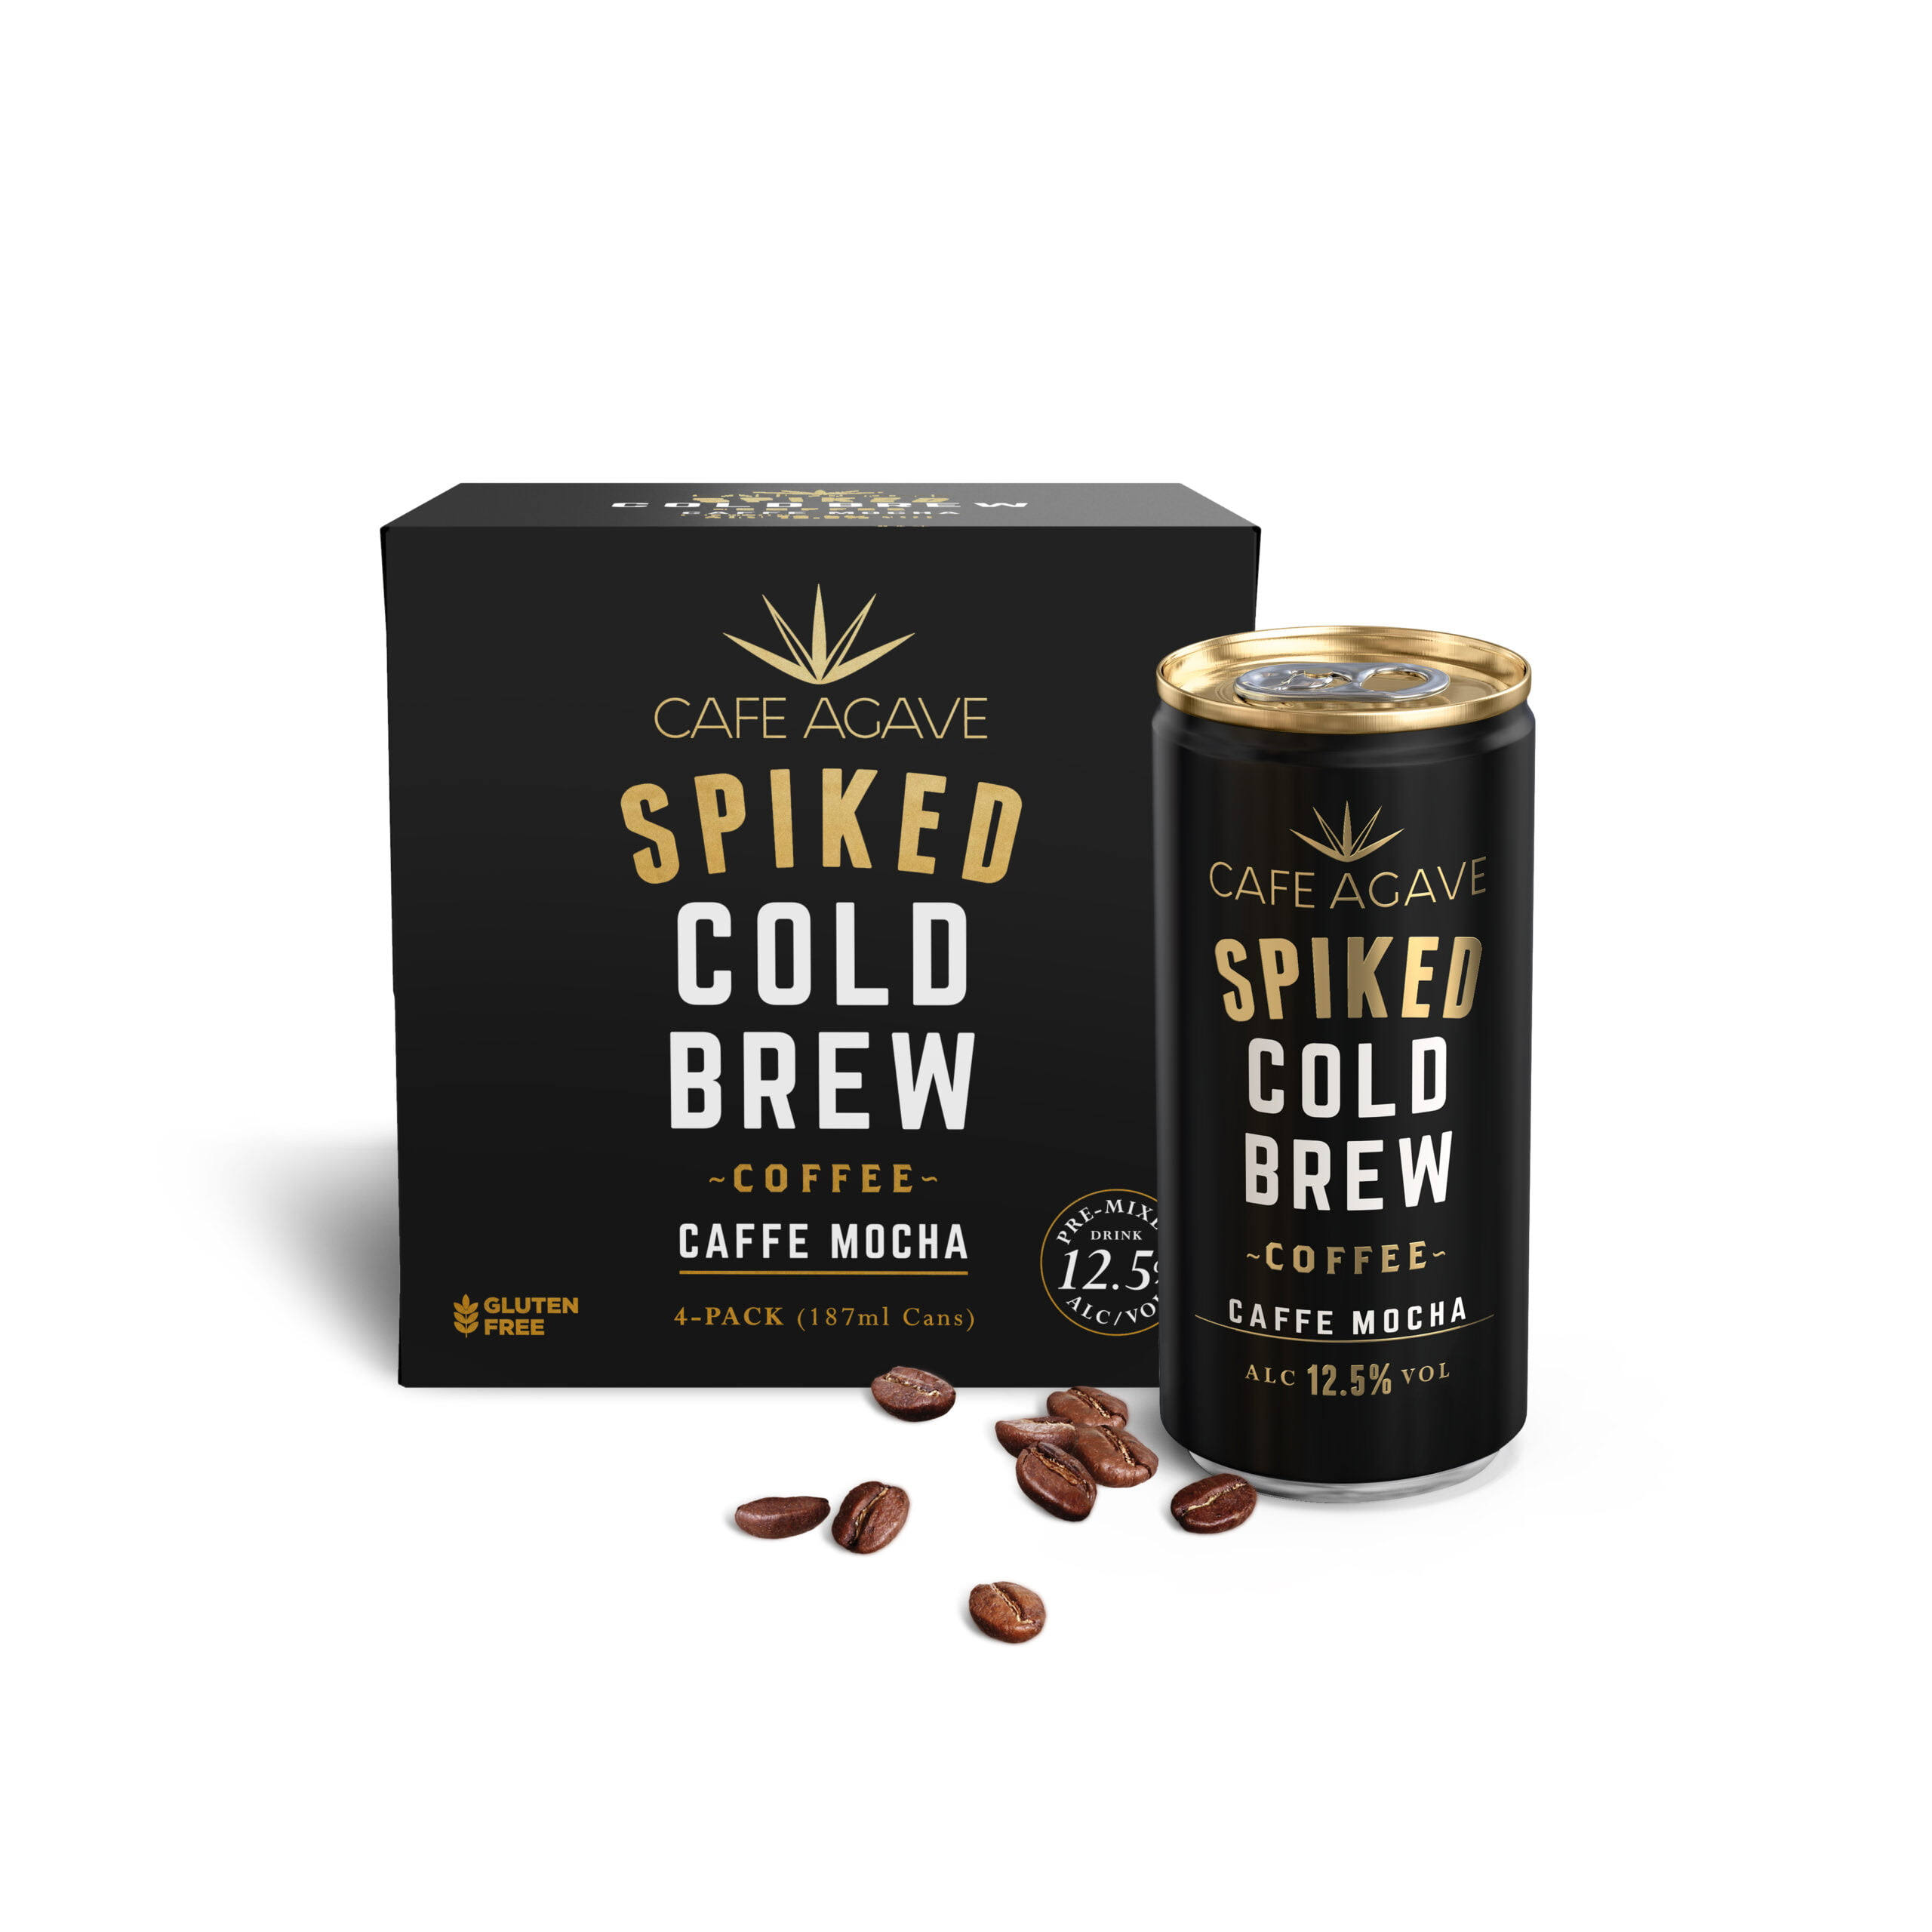 Cafe Agave - Spiked Caffe Mocha Cold Brew Coffee - 187ml